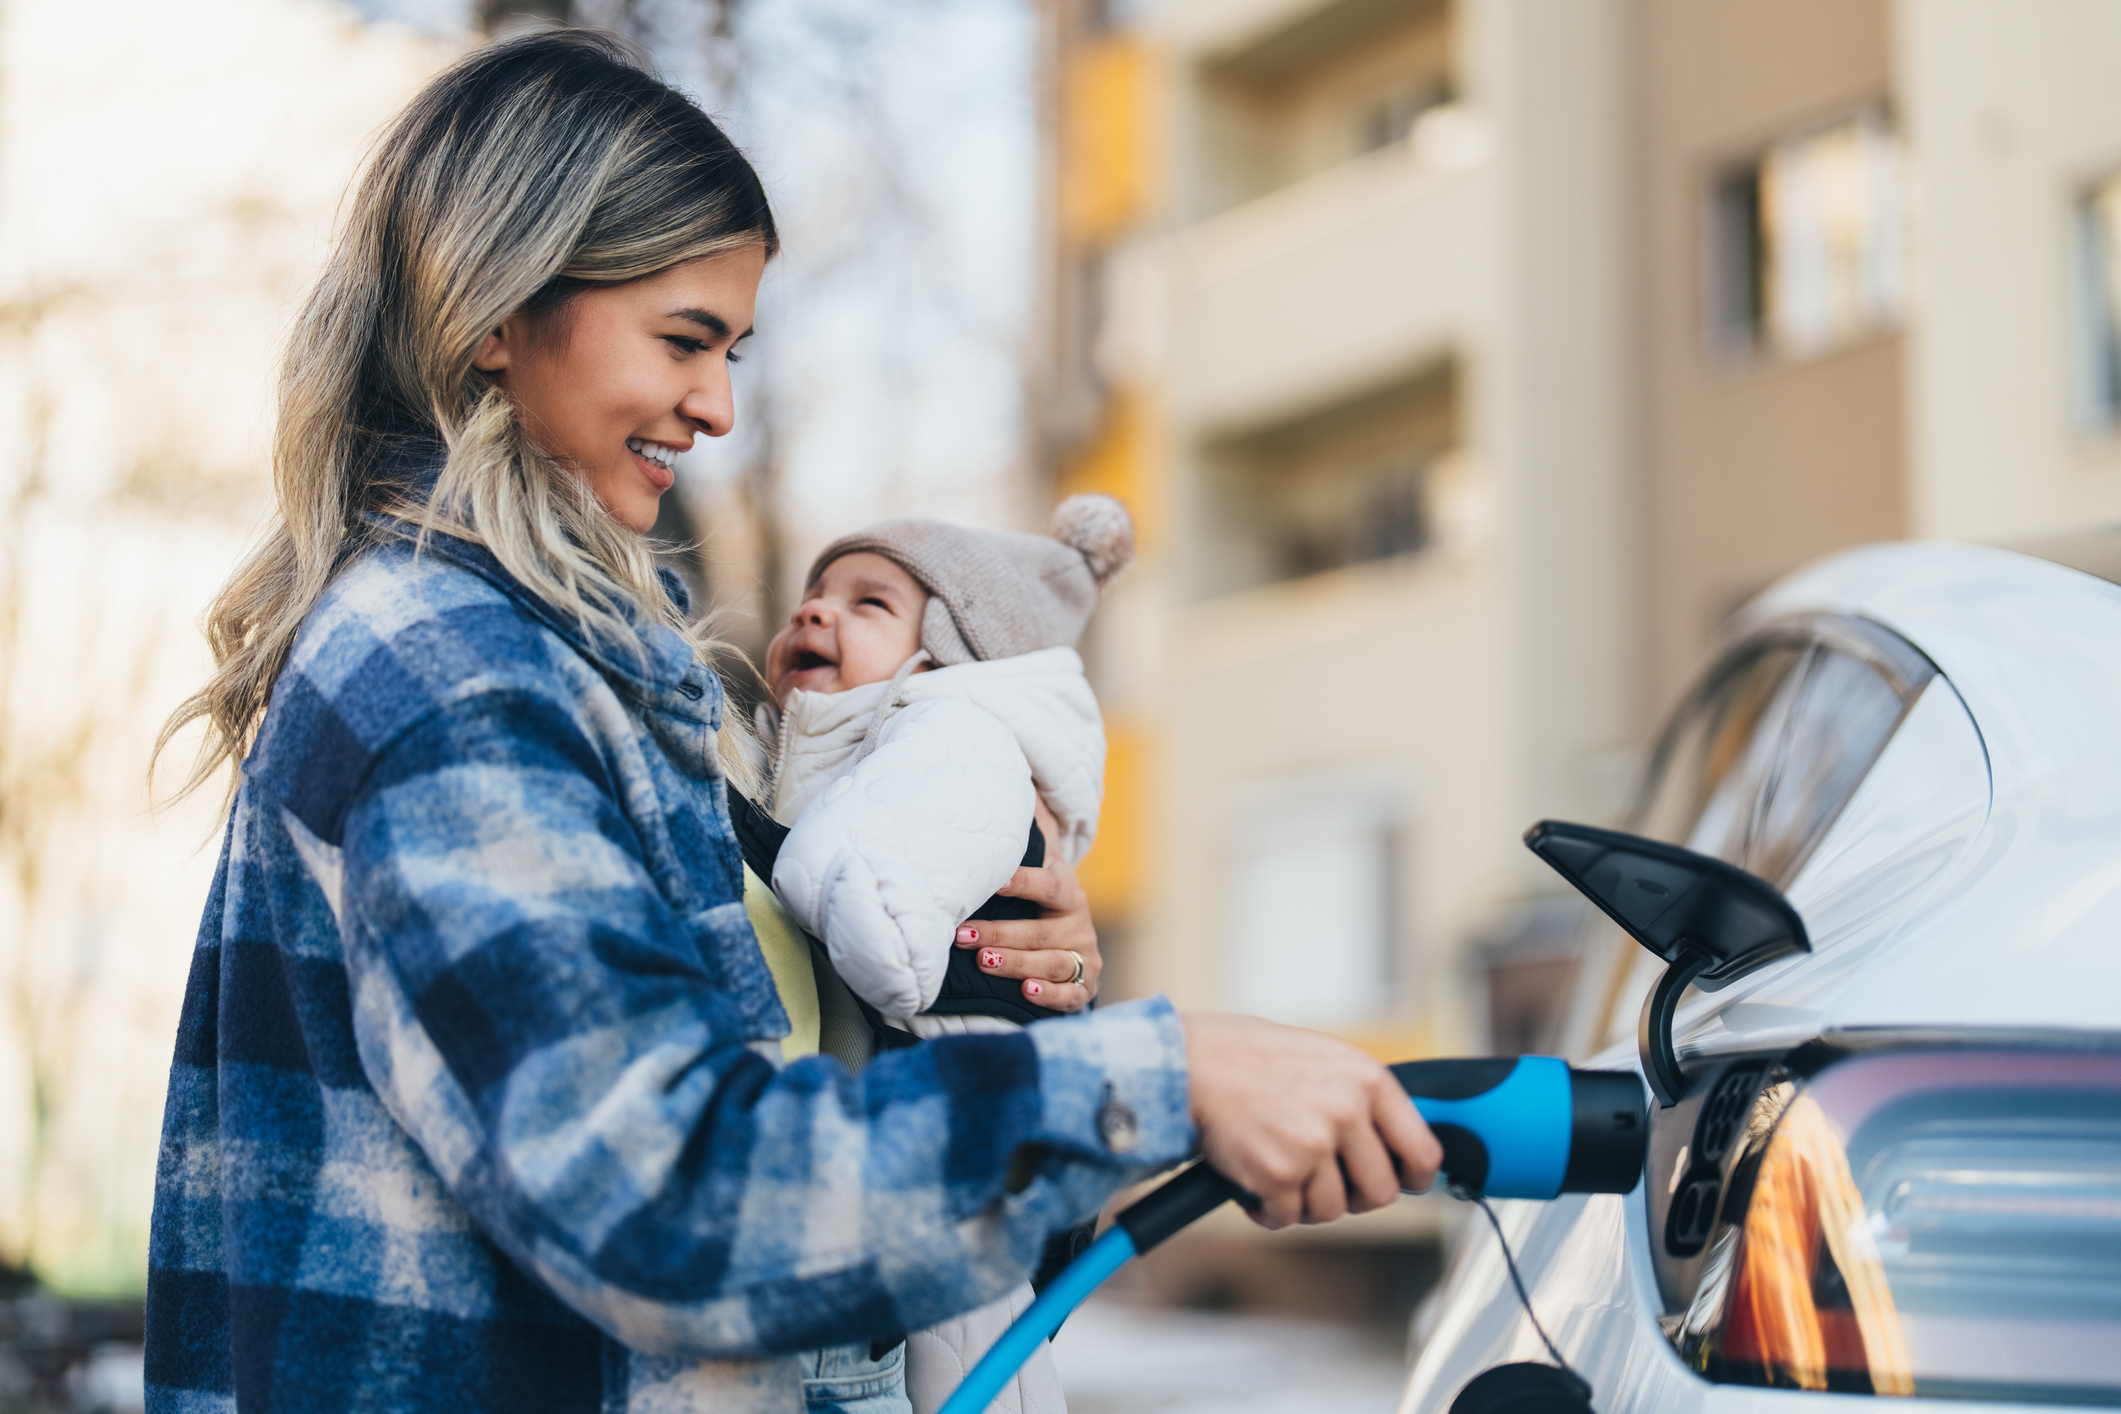 Mother charging her plug-in hybrid electric vehicle with her baby